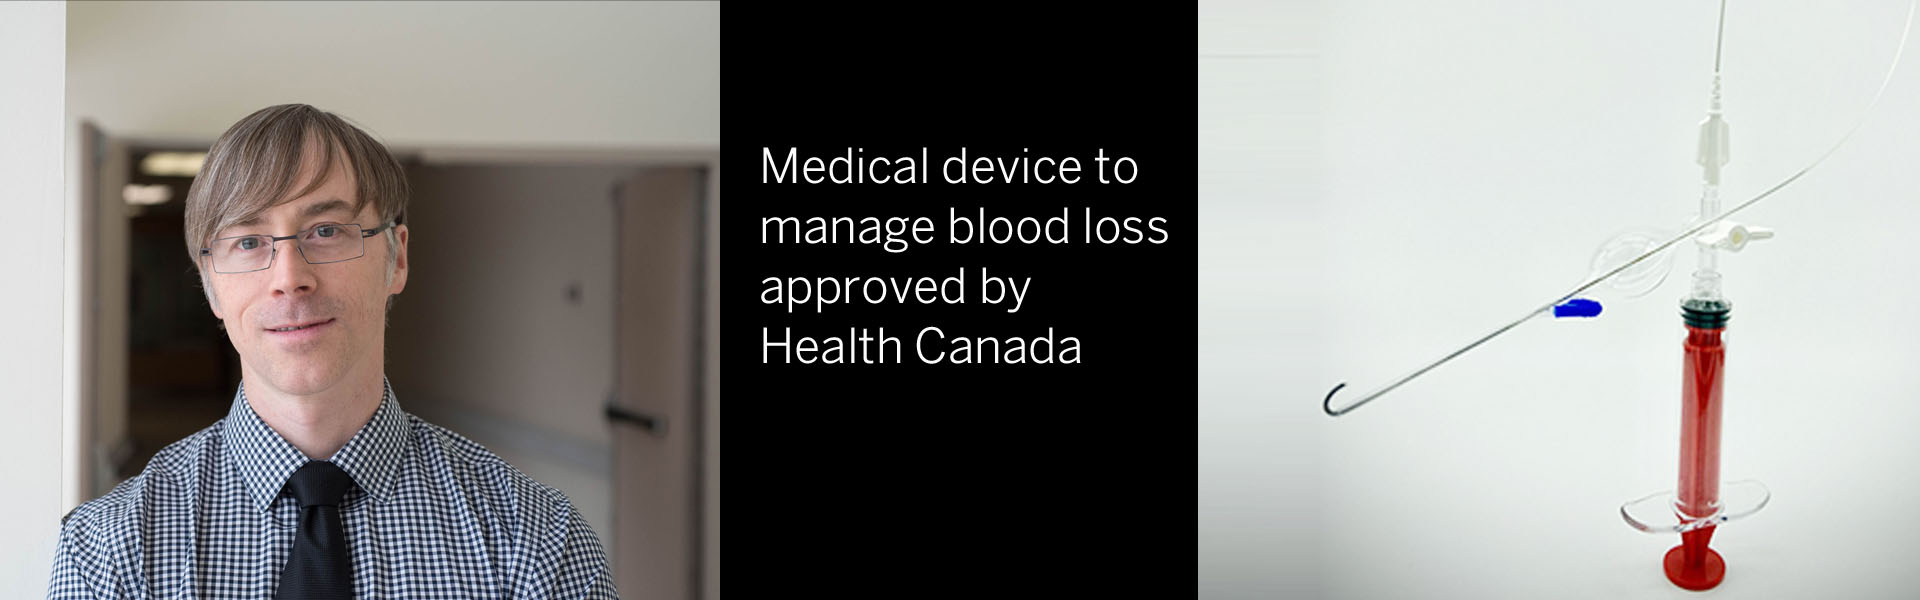 Medical device to manage blood loss approved by Health Canada